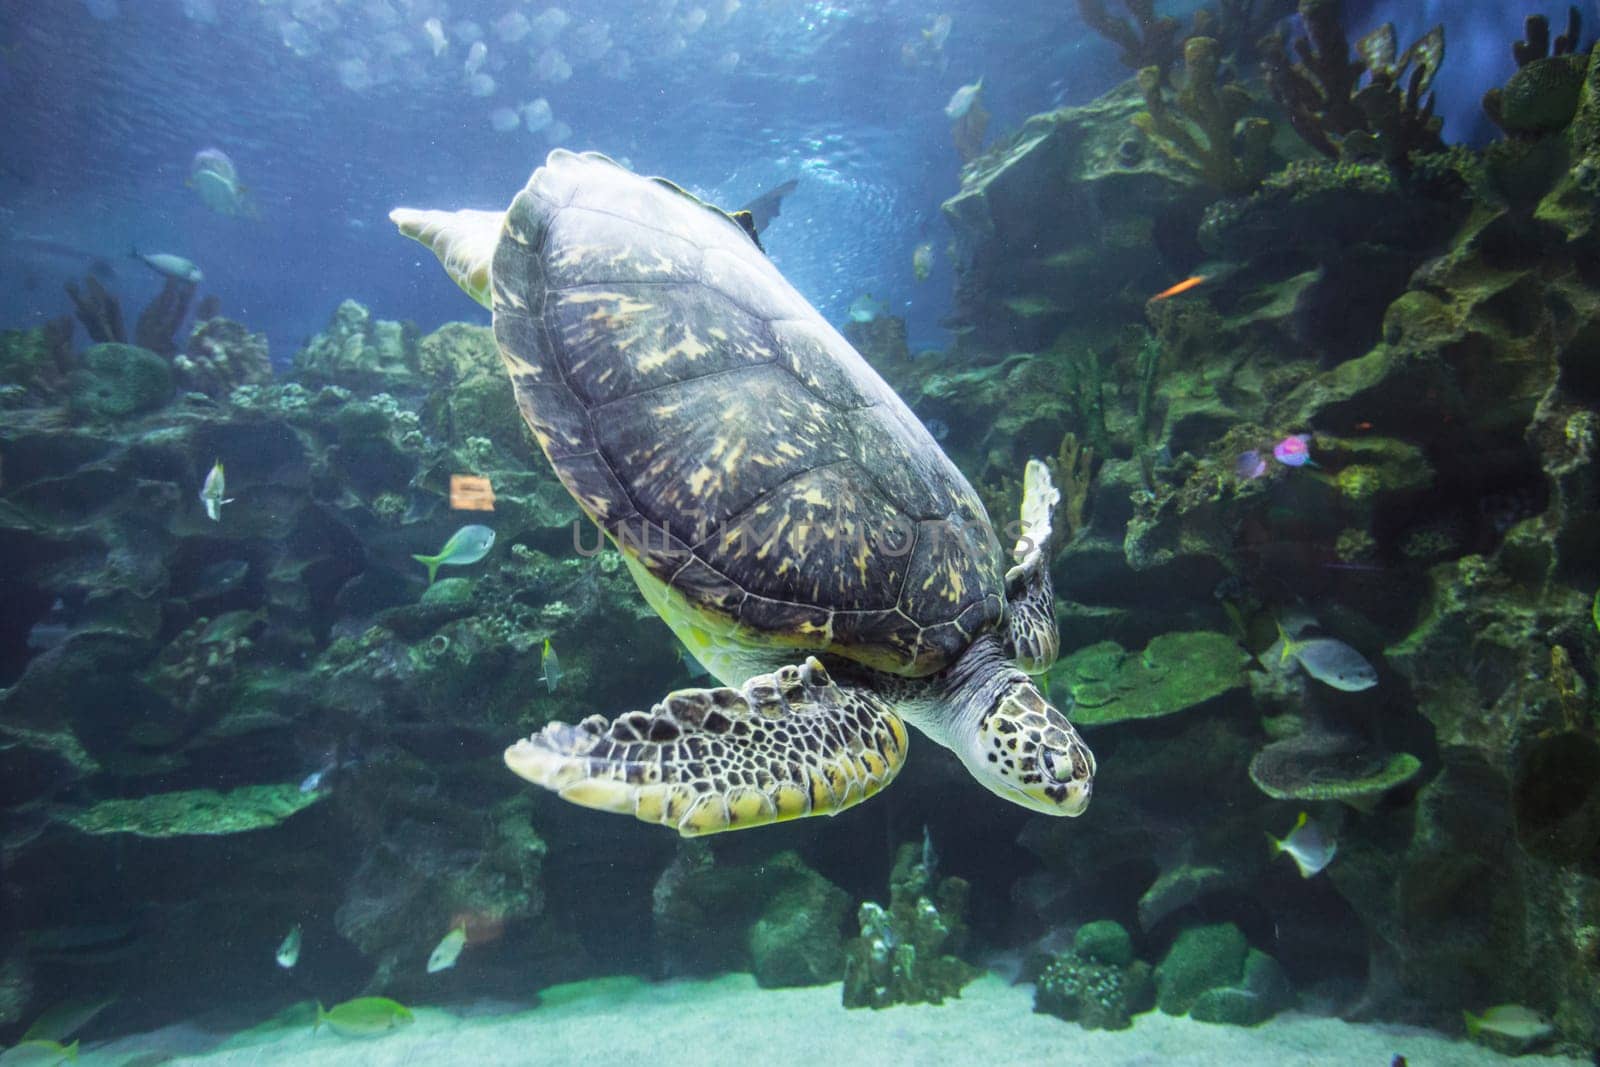 Underwater view of swimming turtle and small fish